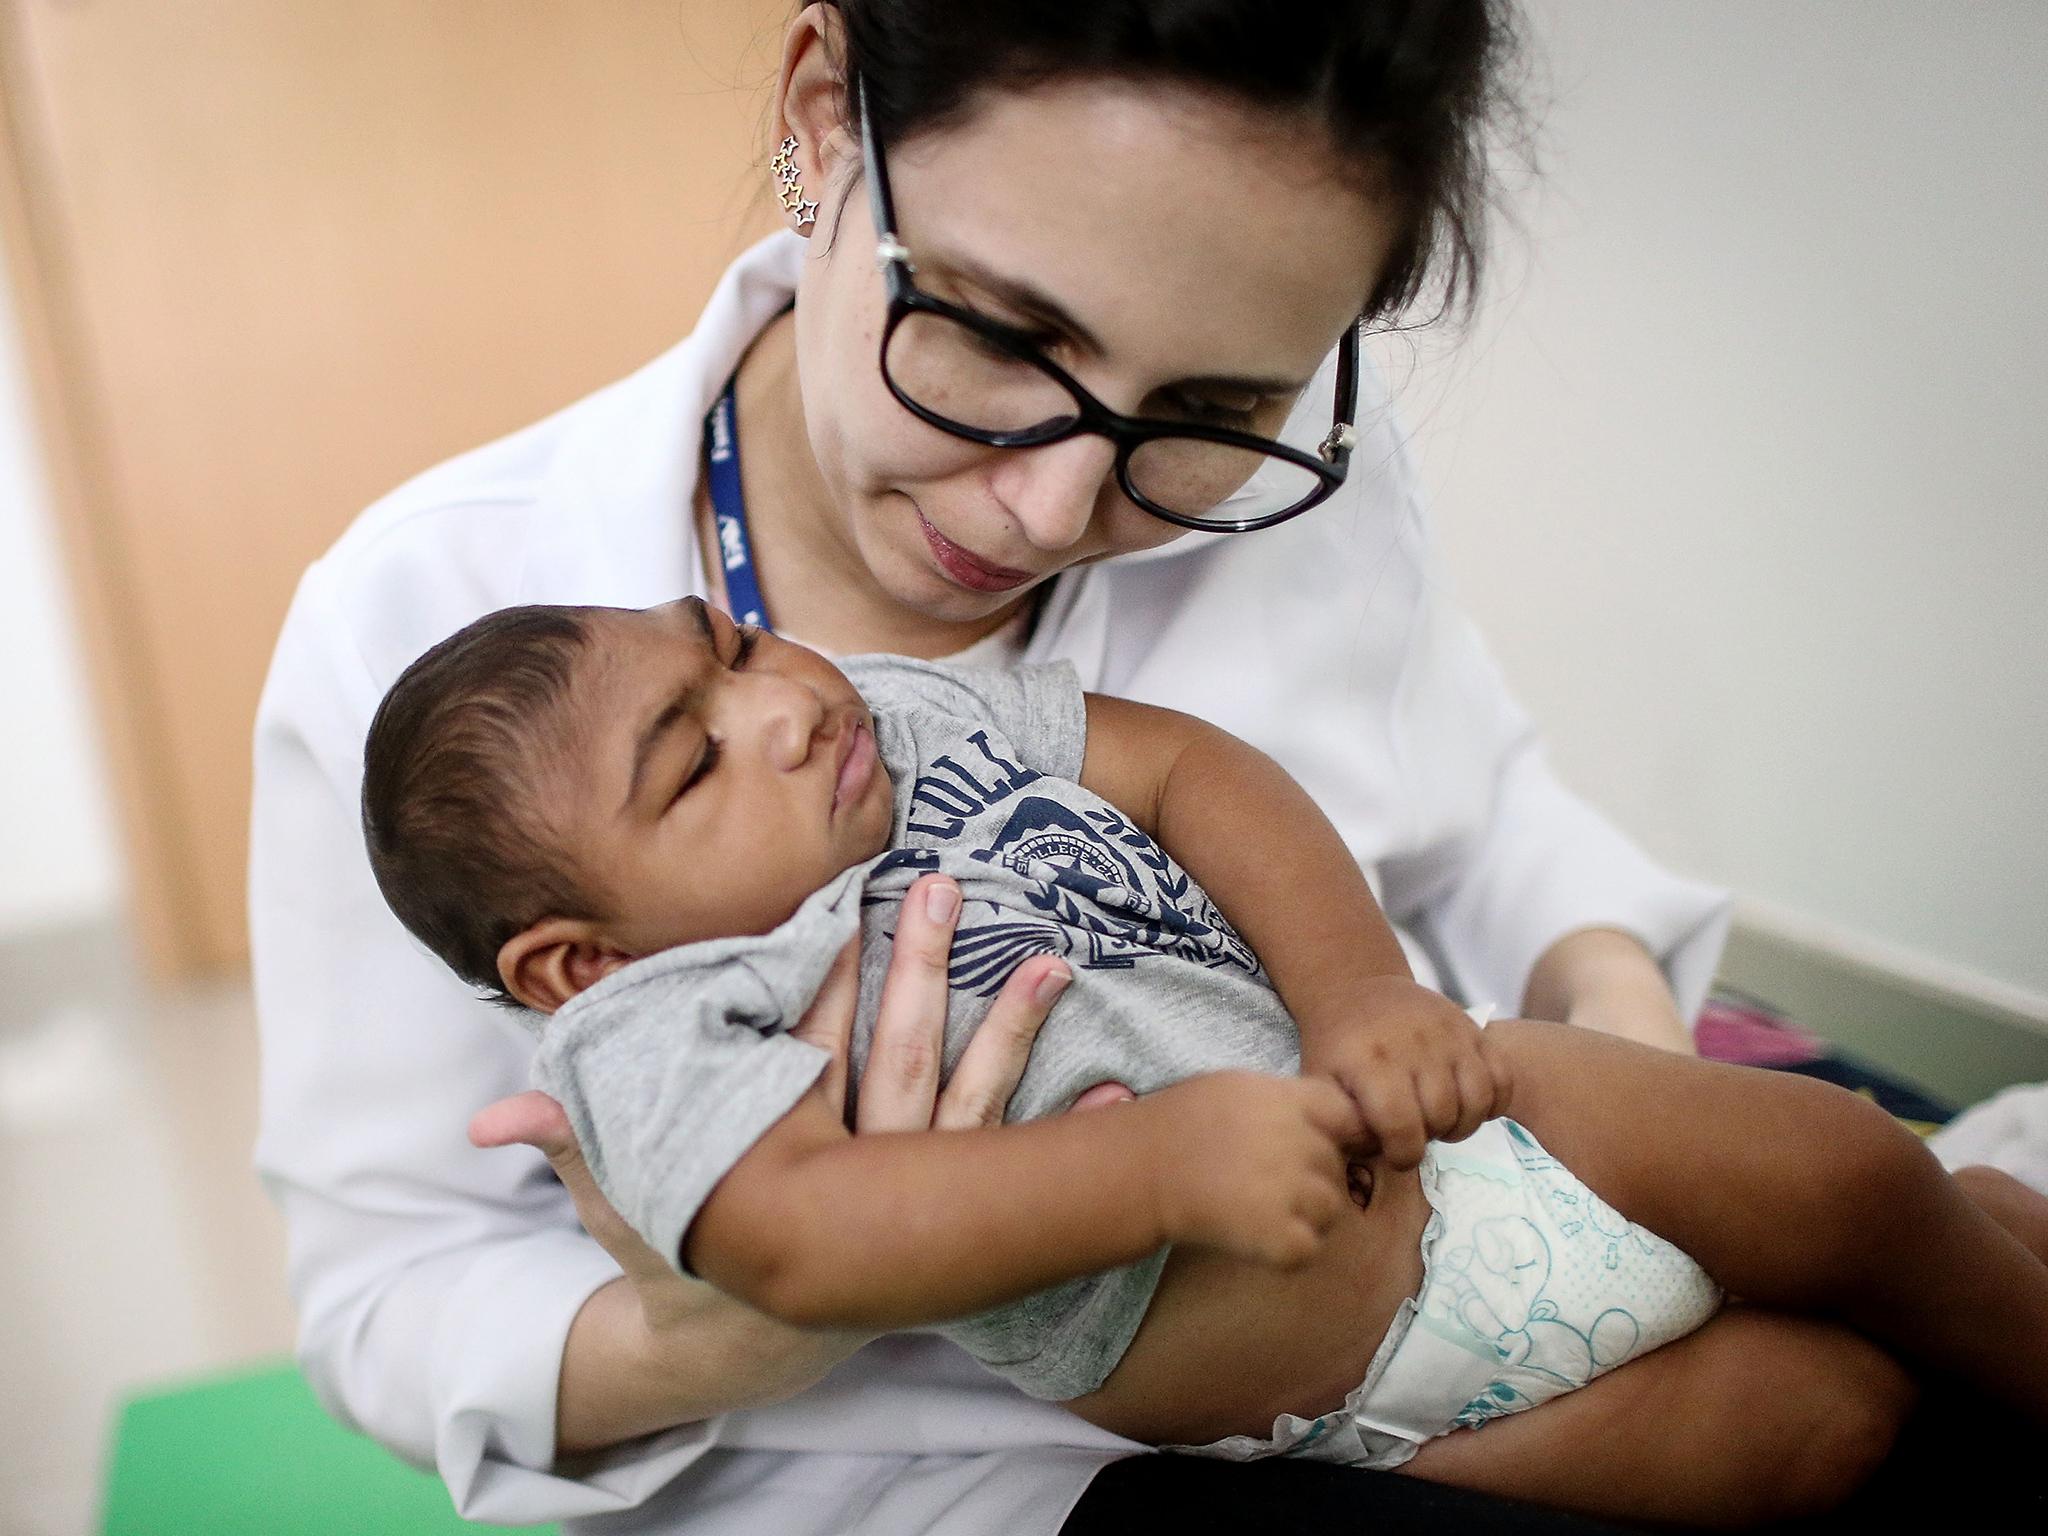 Dr Stella Guerra performs physical therapy on an infant born with microcephaly in Recife, Brazil, earlier this month